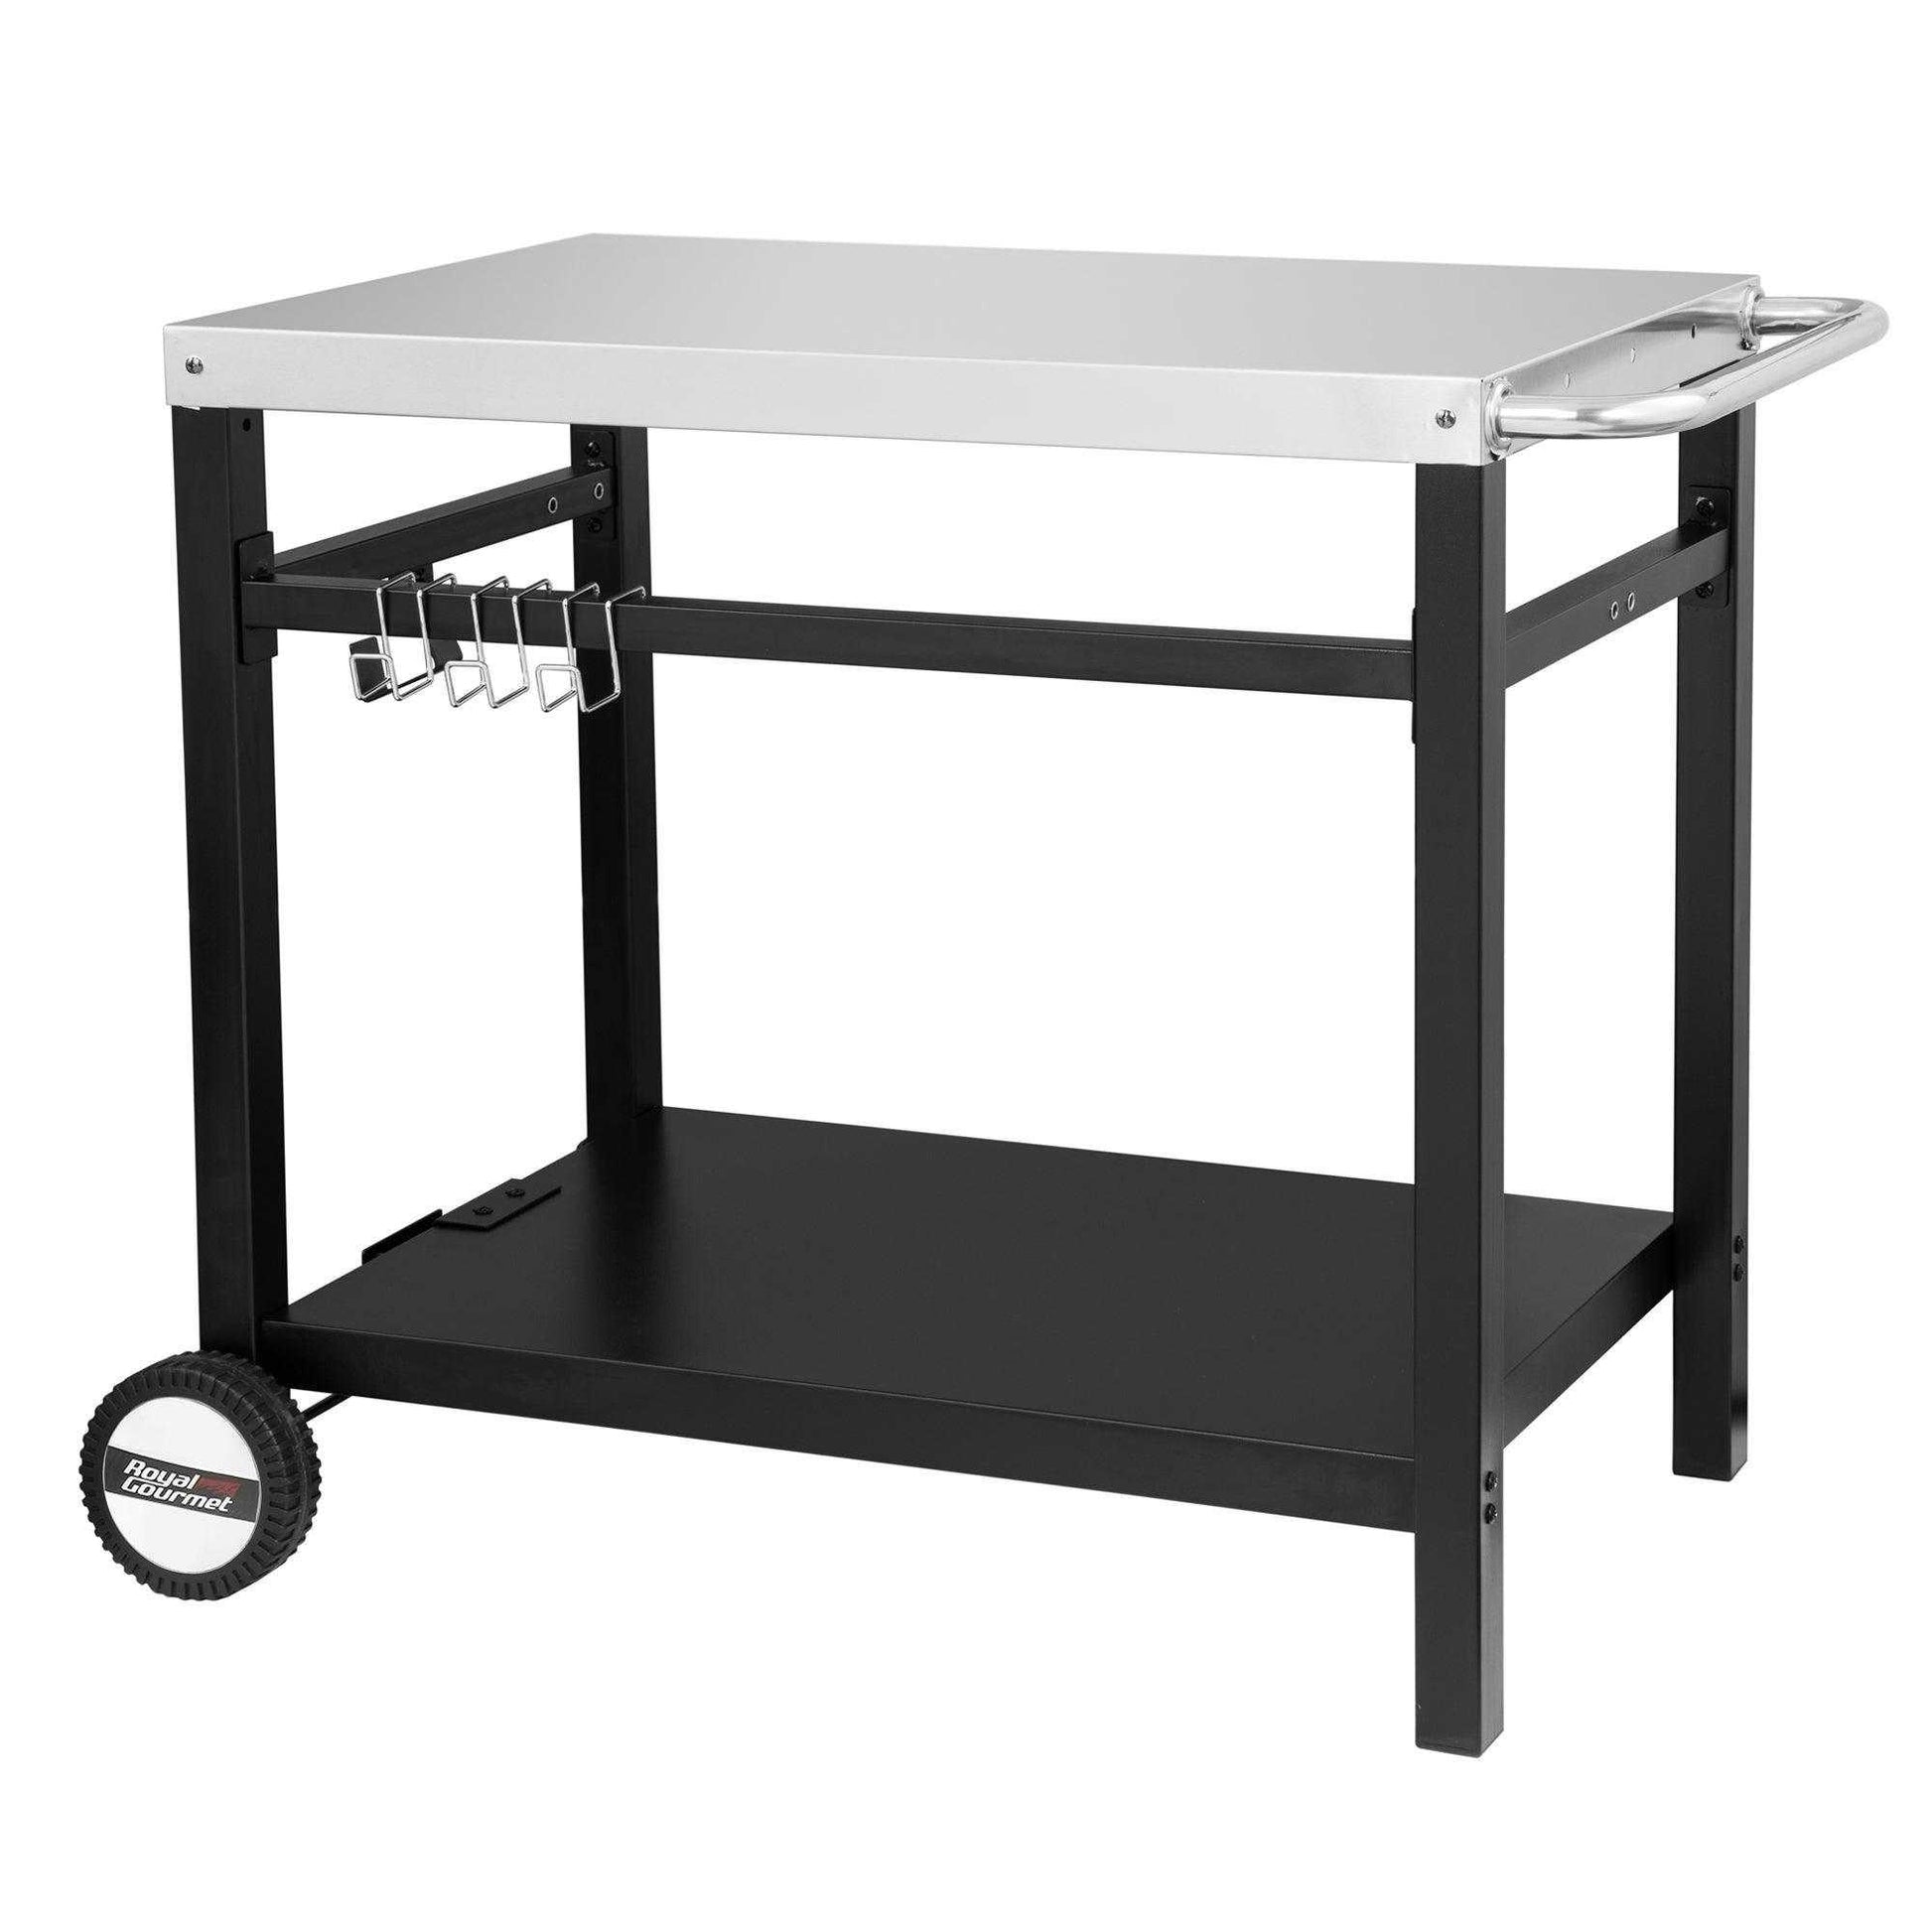 Double Shelf Stainless Steel Grill Cart with Wheels - Royal Gourmet